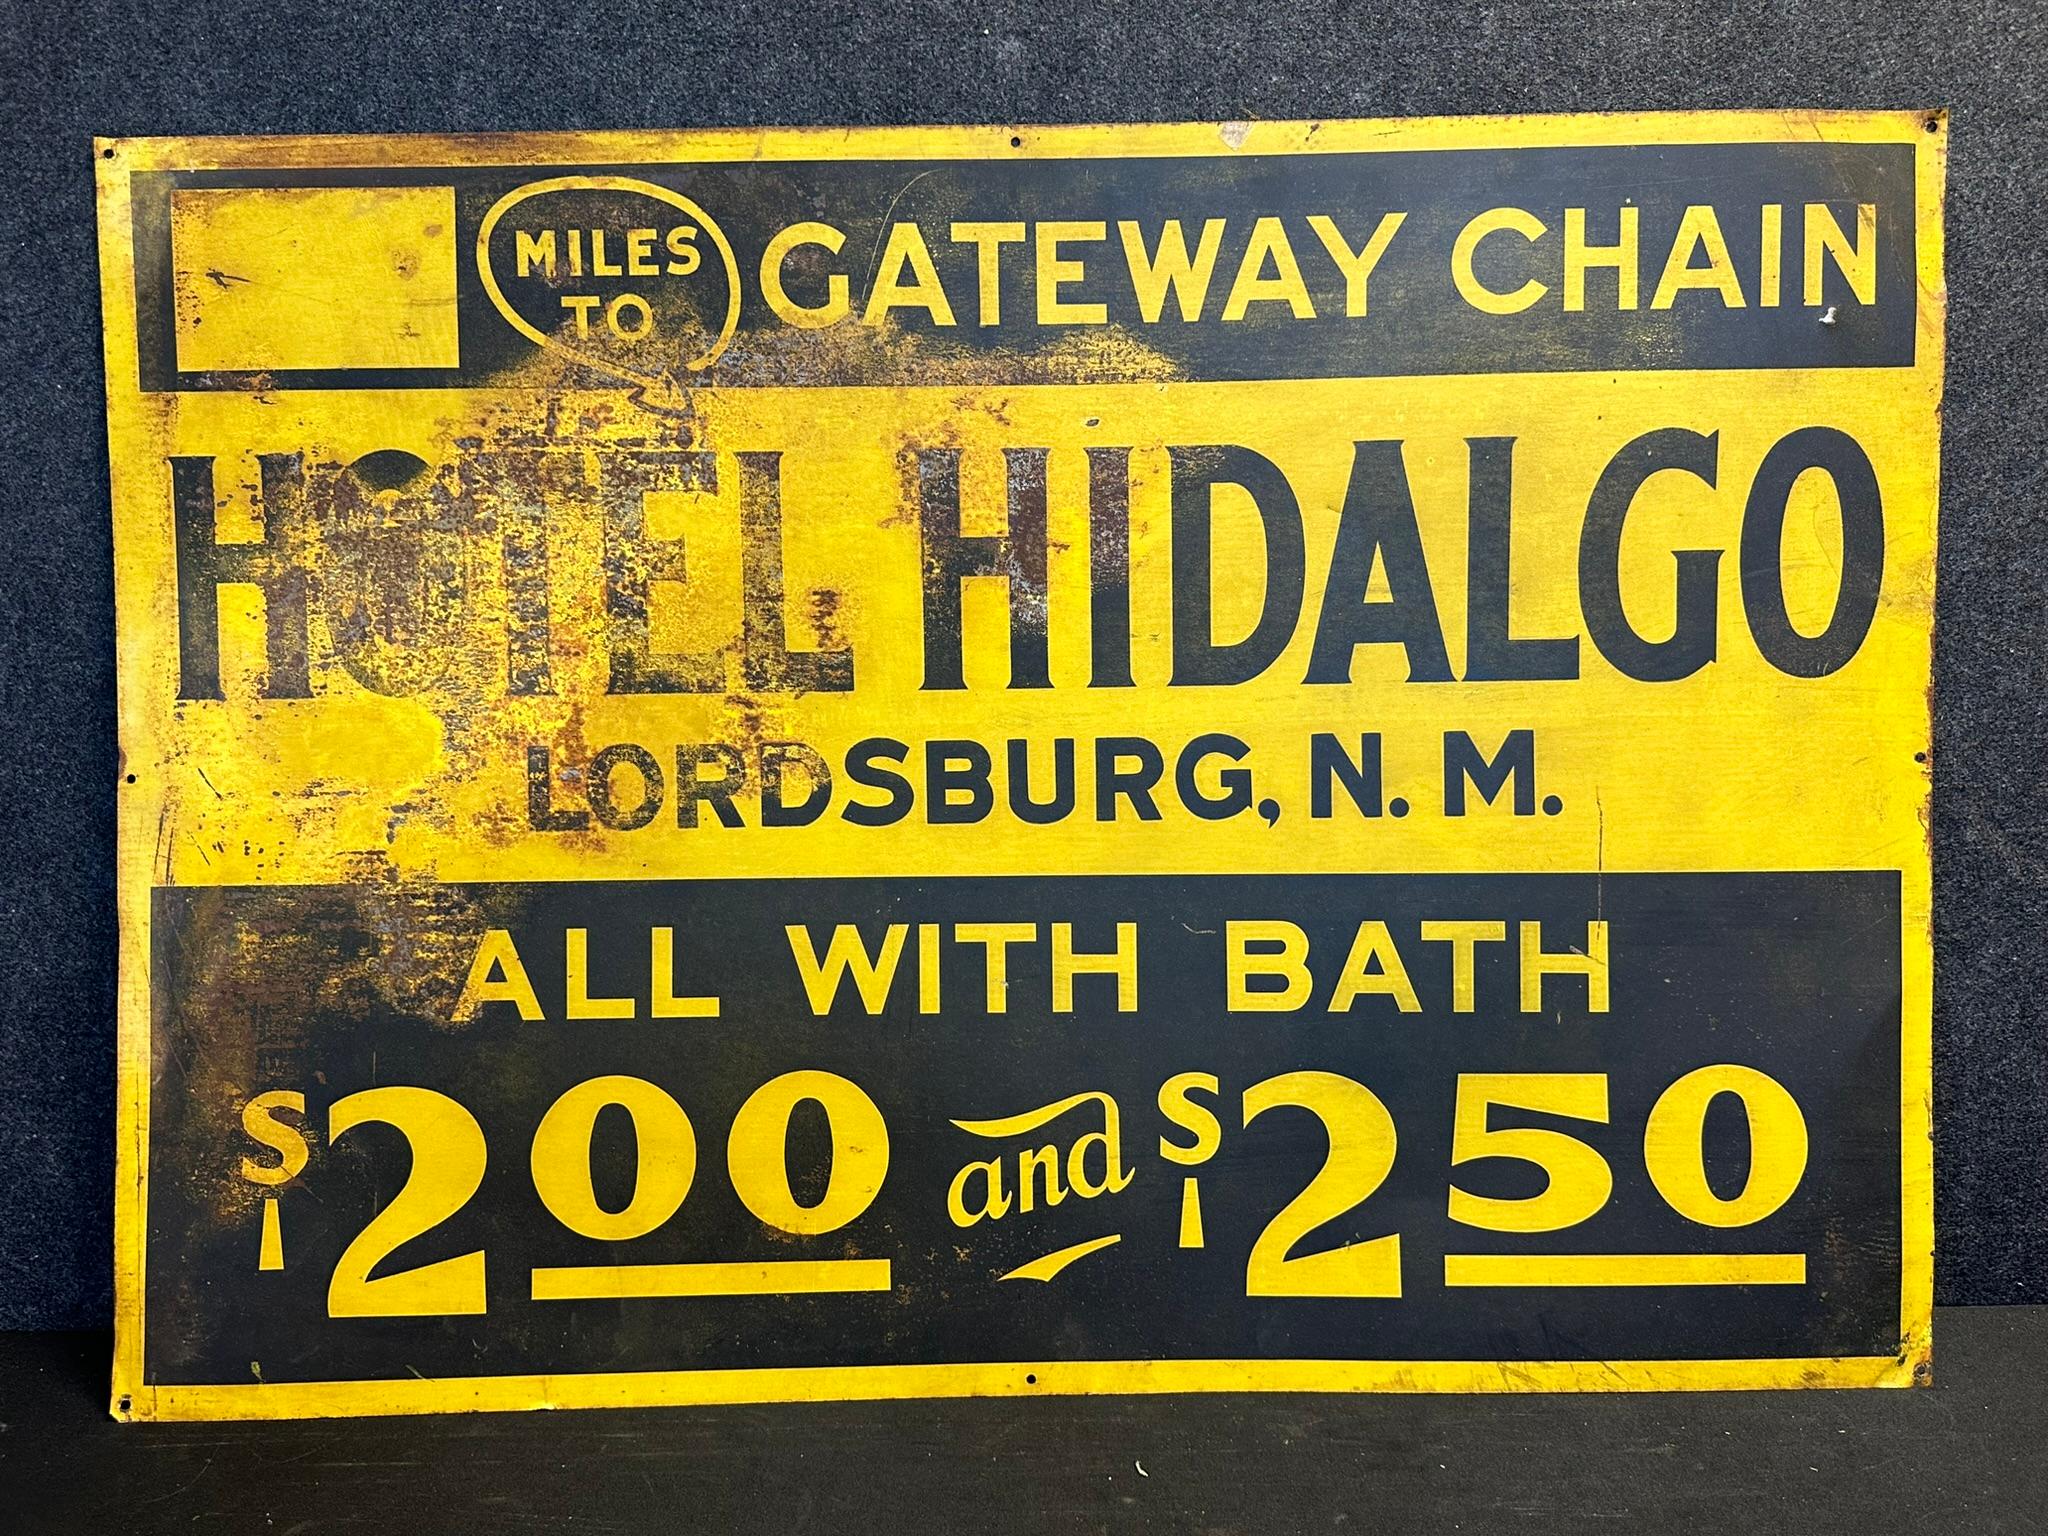 Hotel Hidalgo Lordsburg New Mexico All With Bath Advertising Highway Painted Metal Sign